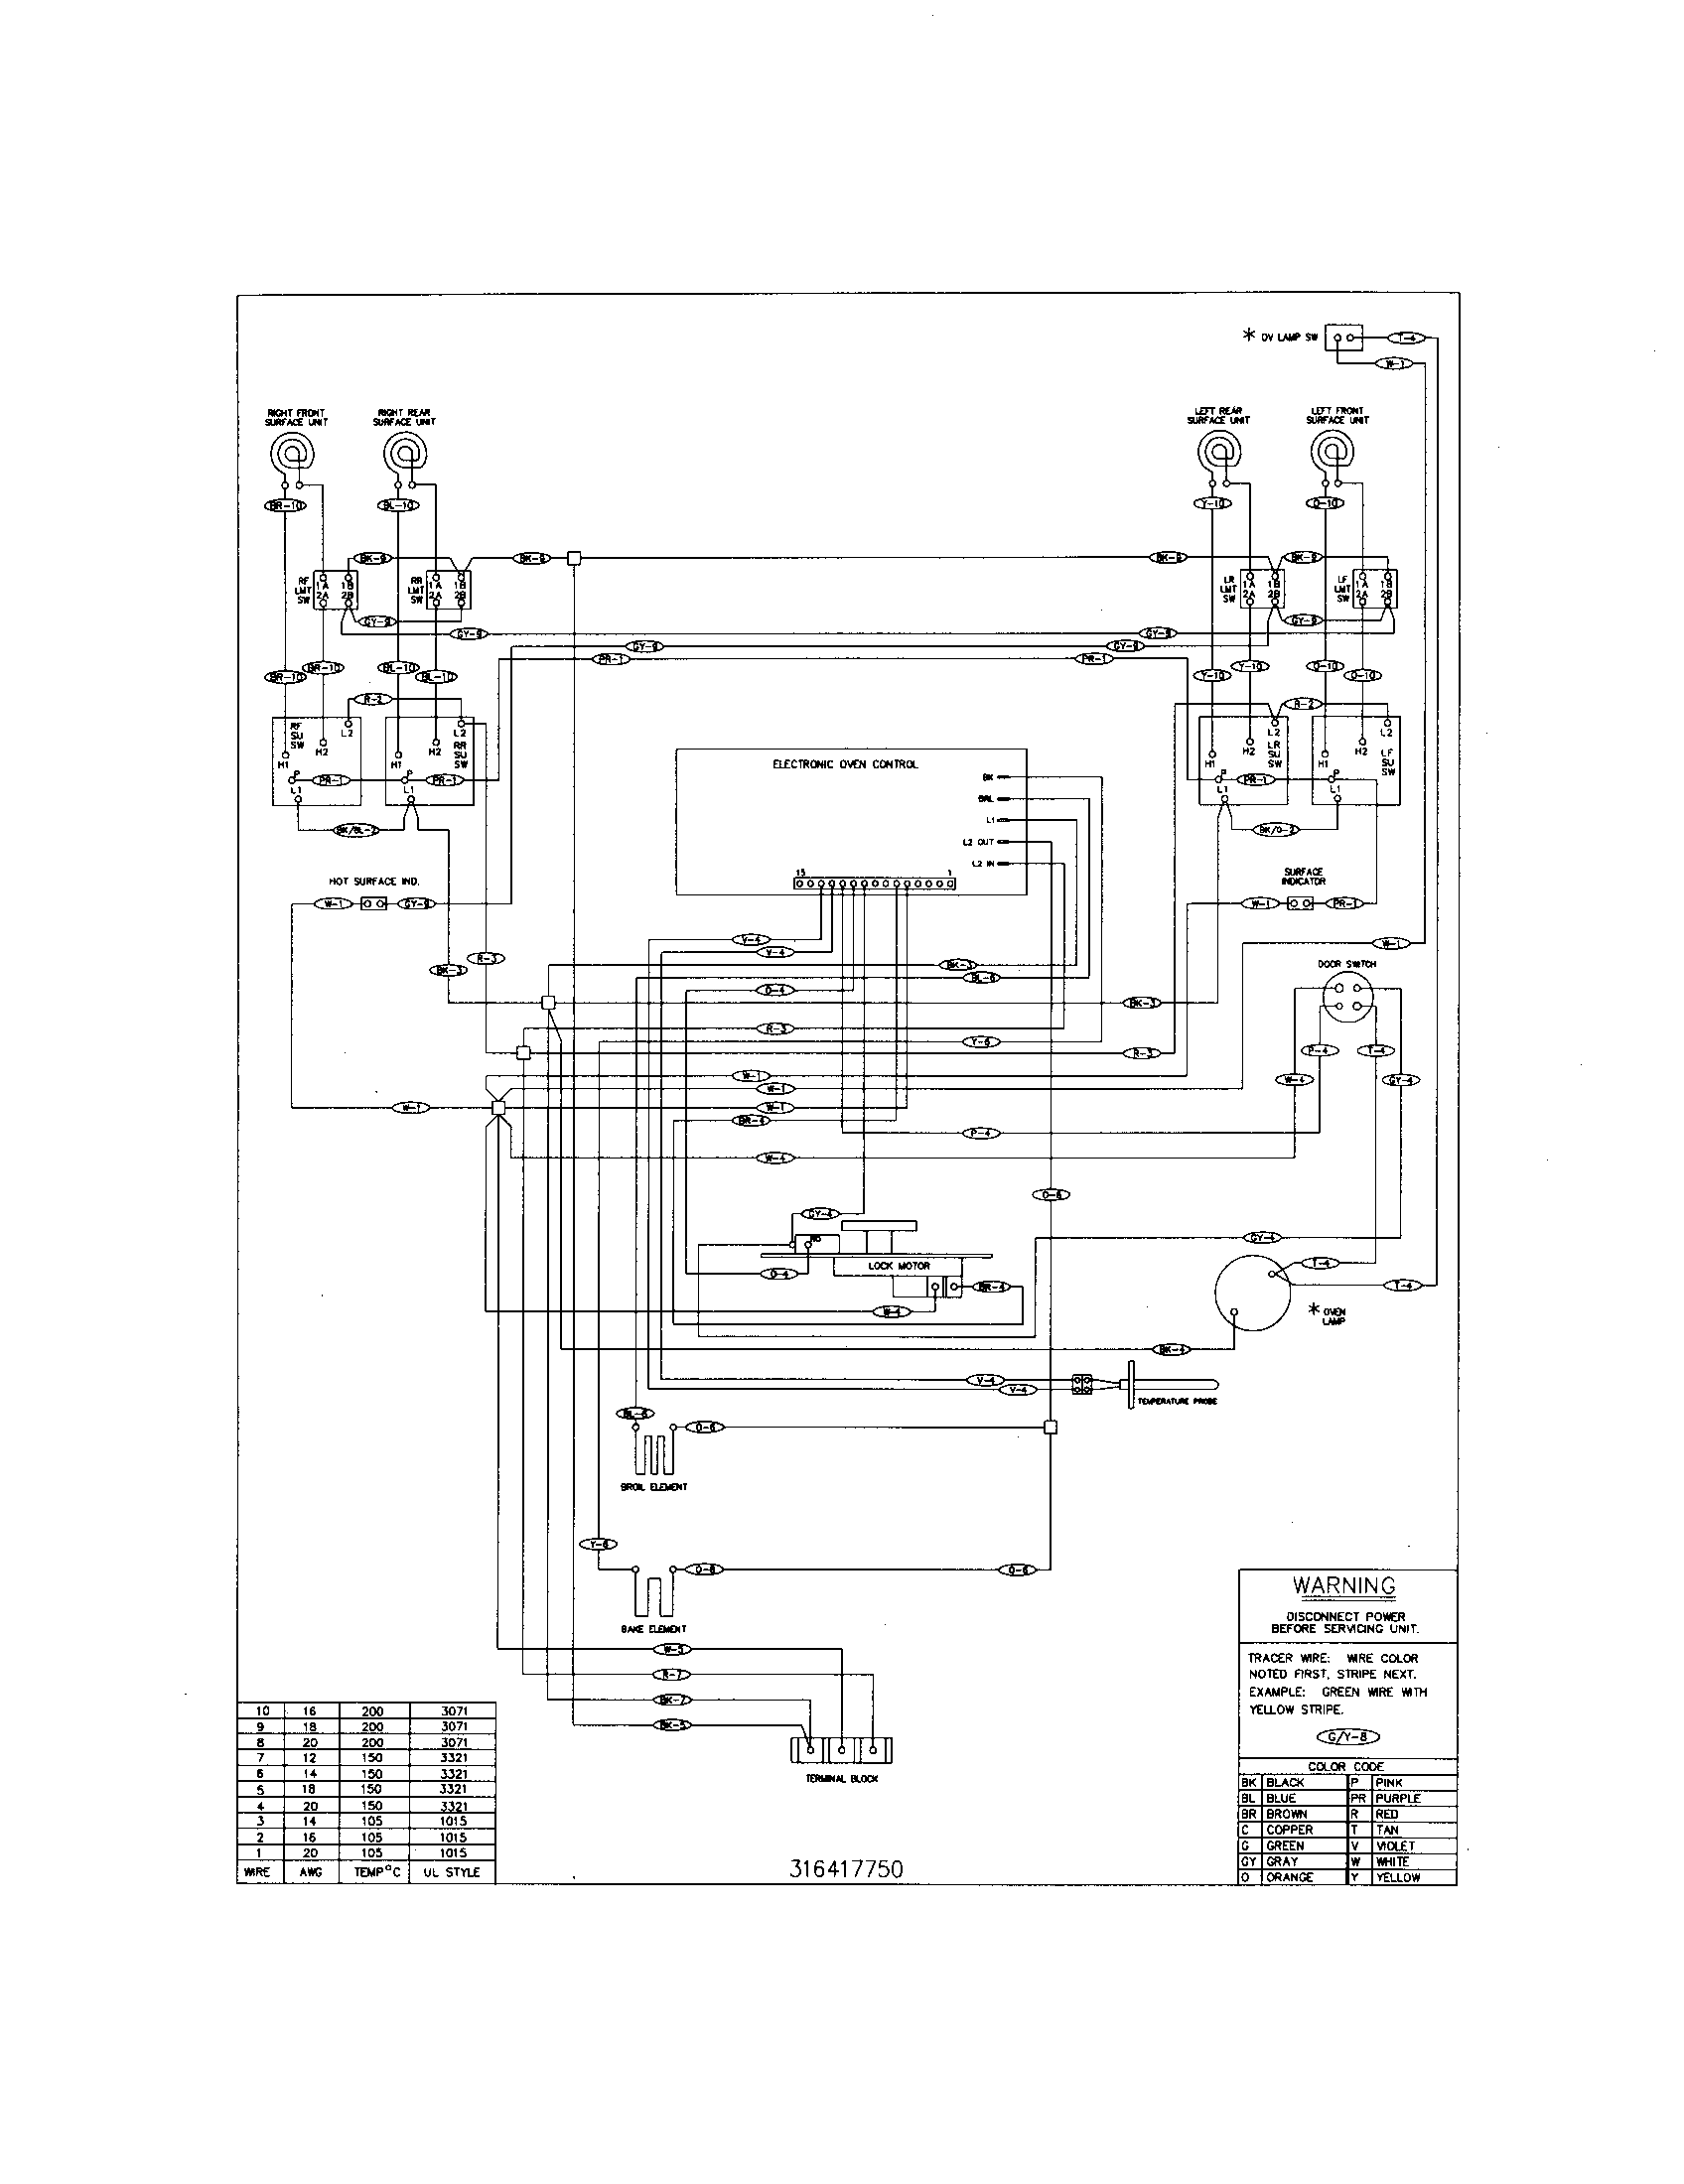 Westinghouse Motor Wiring Diagram from c.searspartsdirect.com